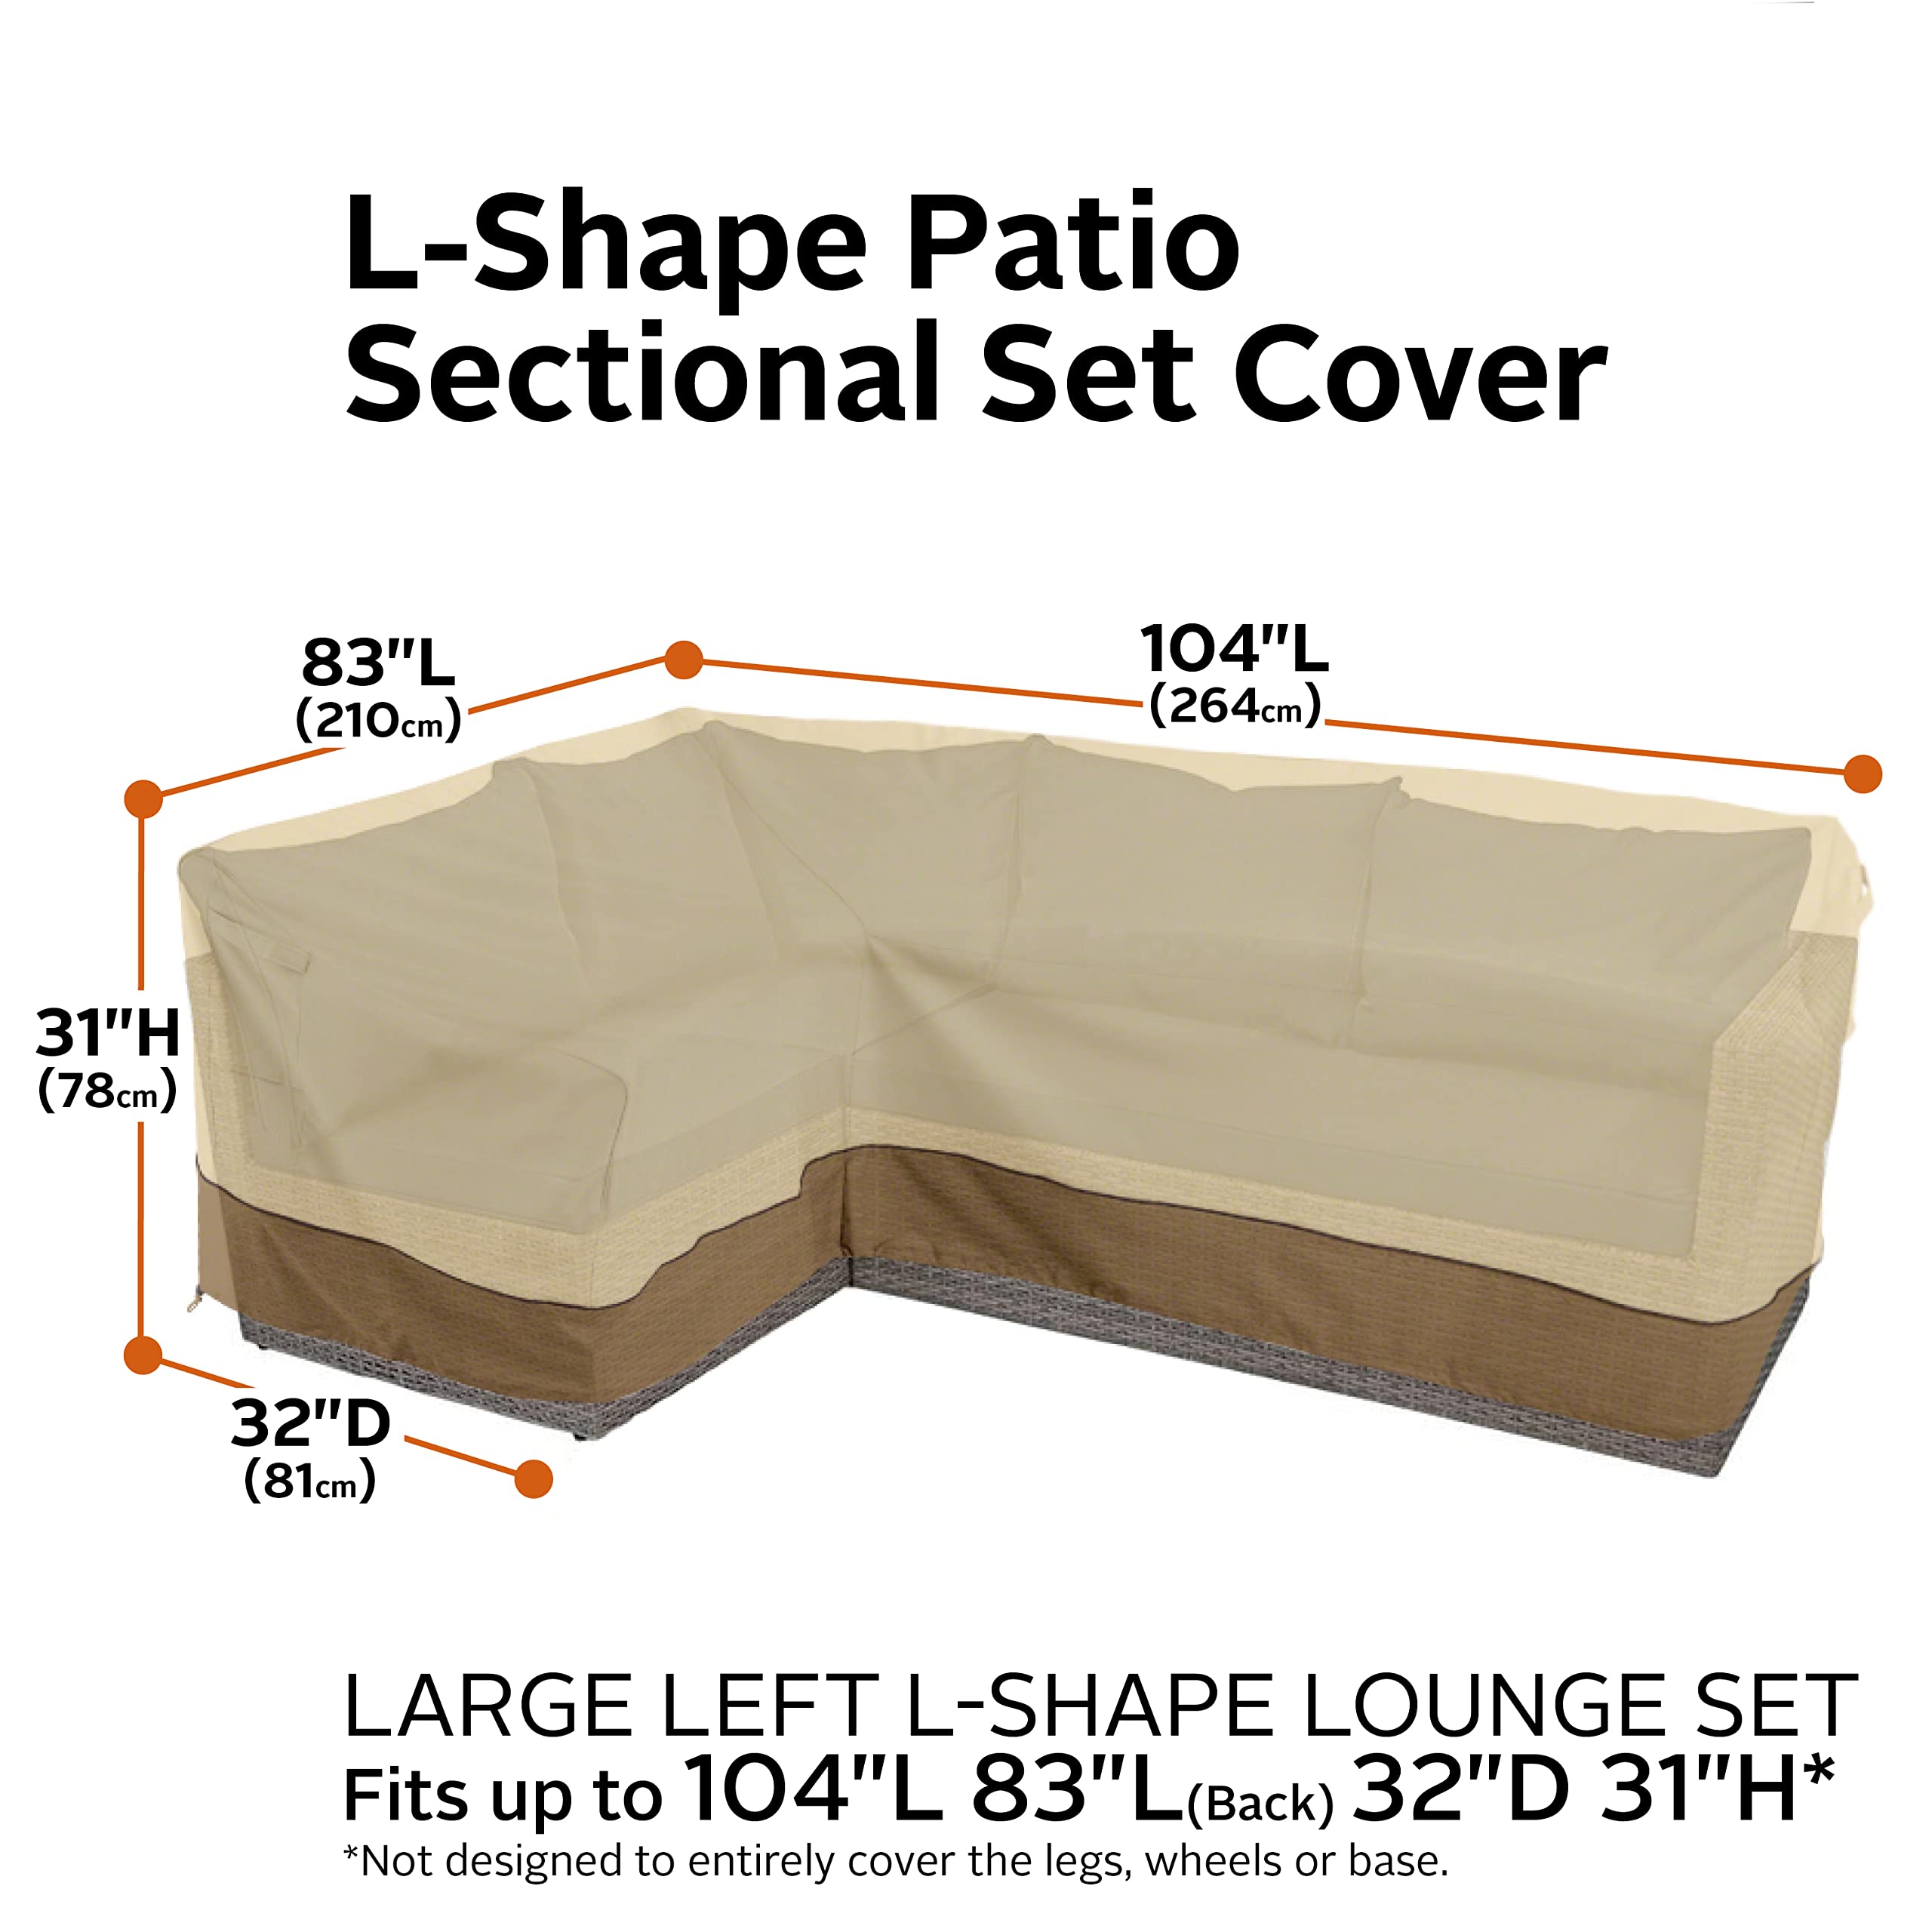 Classic Accessories 55-881-011501-RT Facing, Large Veranda Patio L-Shaped Sectional Sofa Cover, Left, Pebble, Patio Furniture Covers